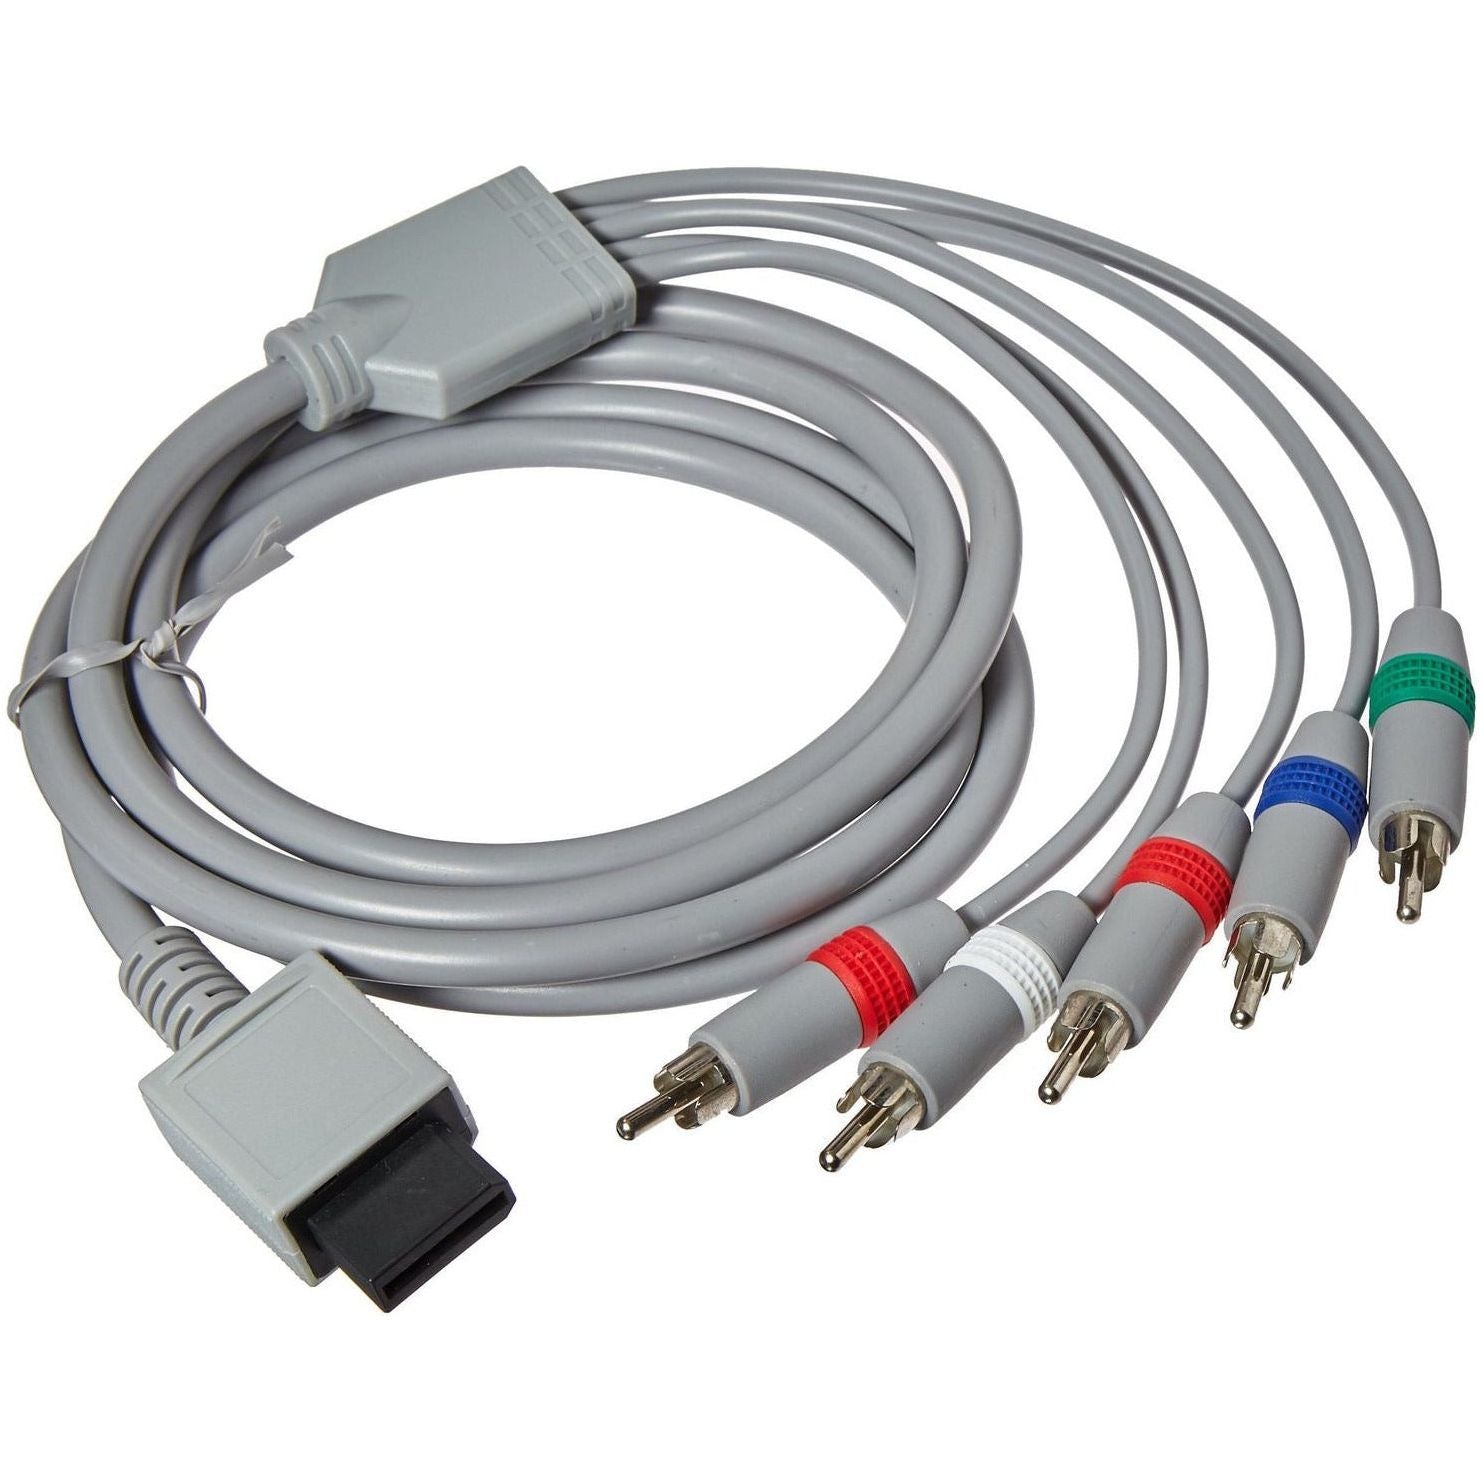 Nintendo Wii (Non-OEM) Component Video Cable